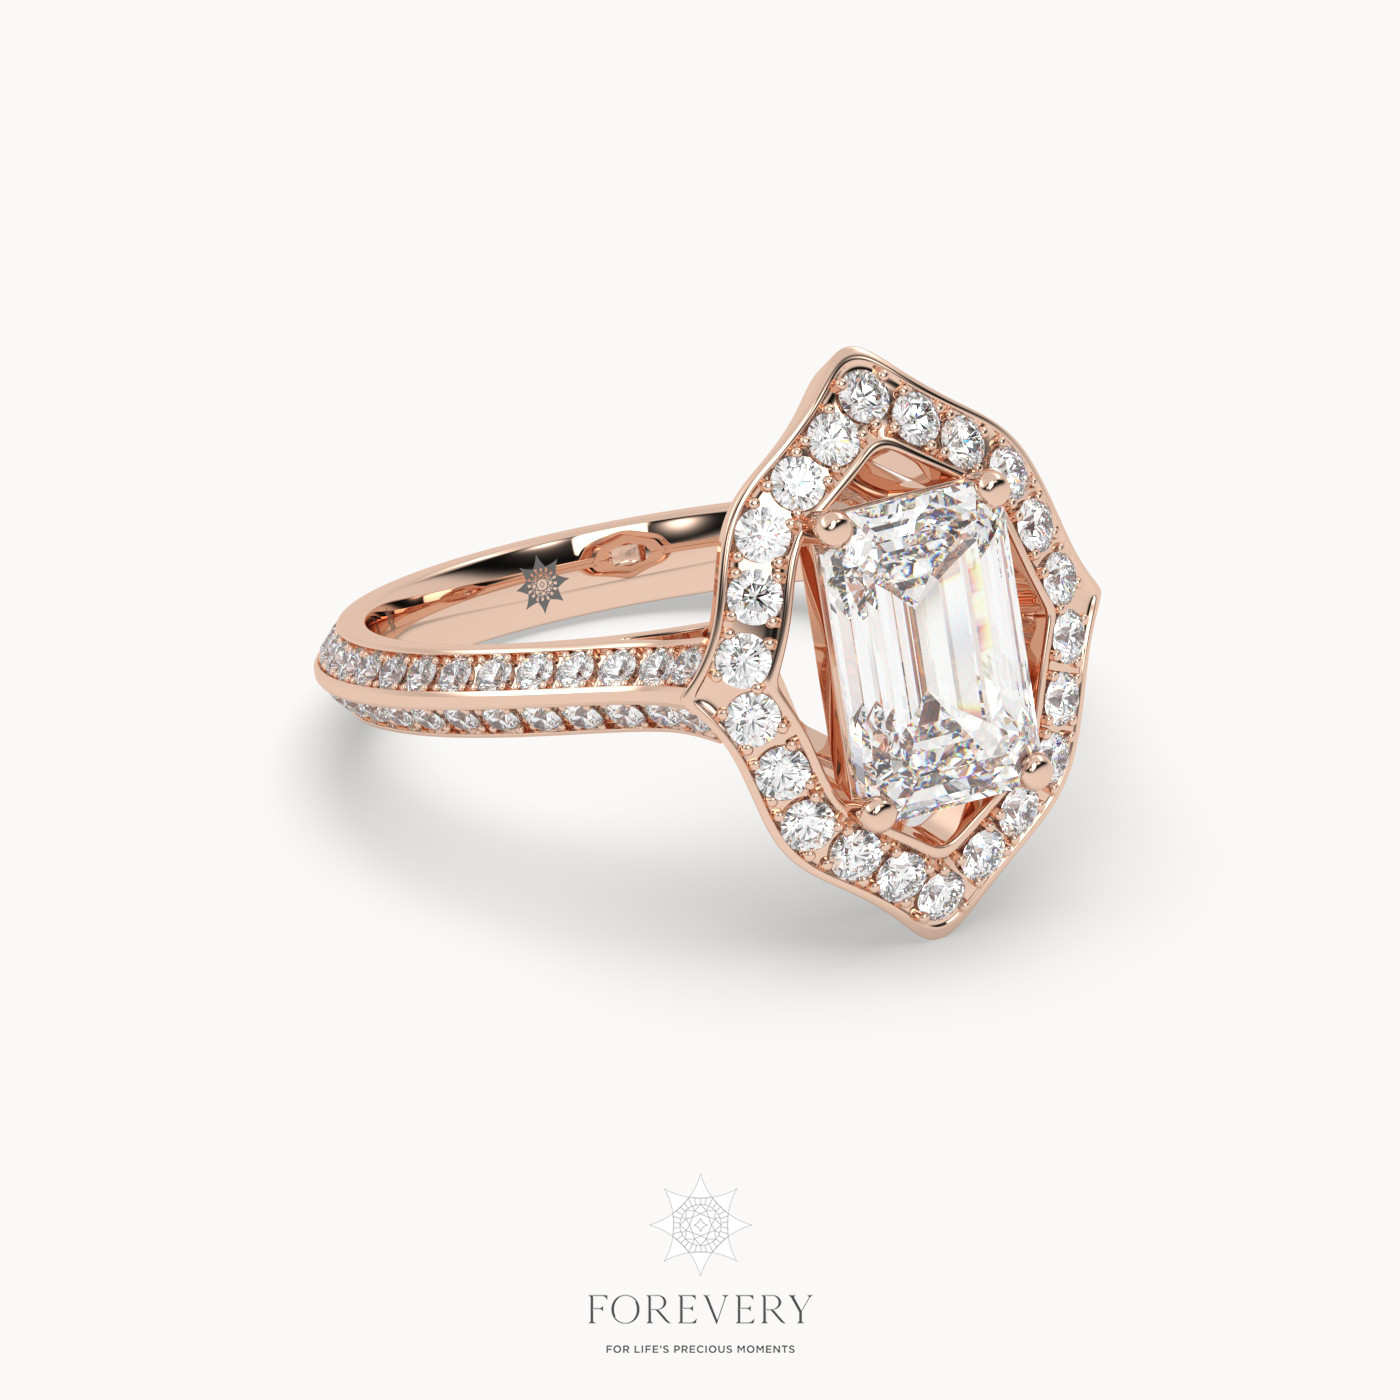 18K ROSE GOLD Emerald Cut Unique Engagament Ring with Knife Edge Band